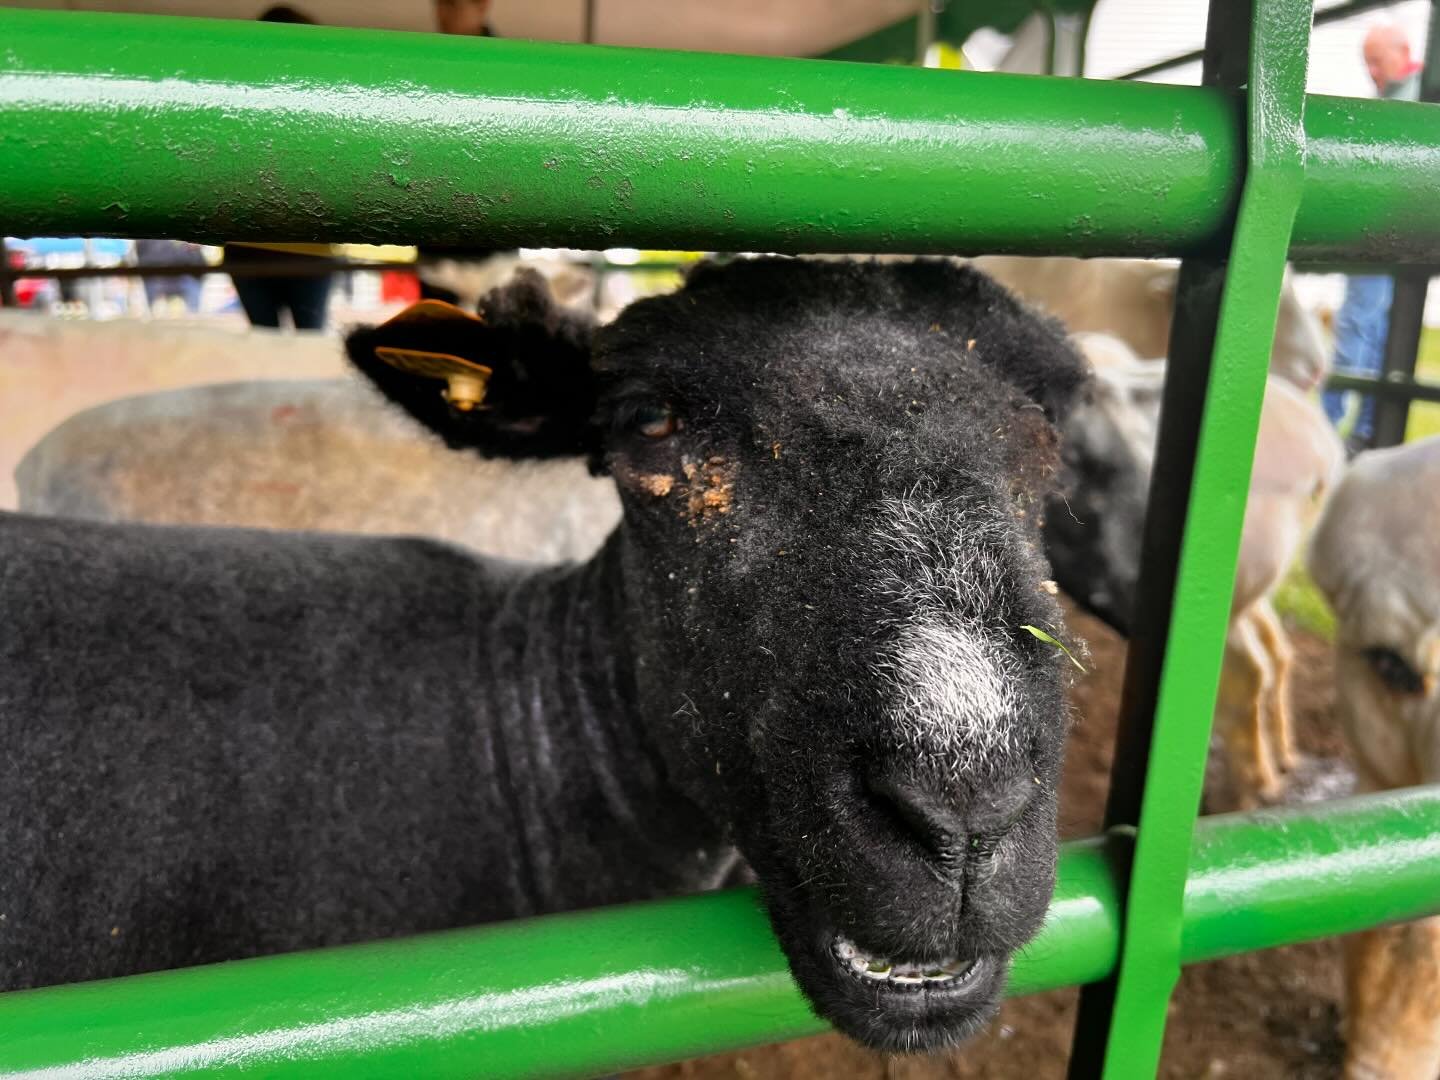 We had newly shorn sheep, baby chicks and lambs, plus the start of the green market season, yet hard not to think the new parking lot might have been the best gift of all. #muscootfarm #westchestercountyparks #sheepshearing #mothersday #greenmarket #